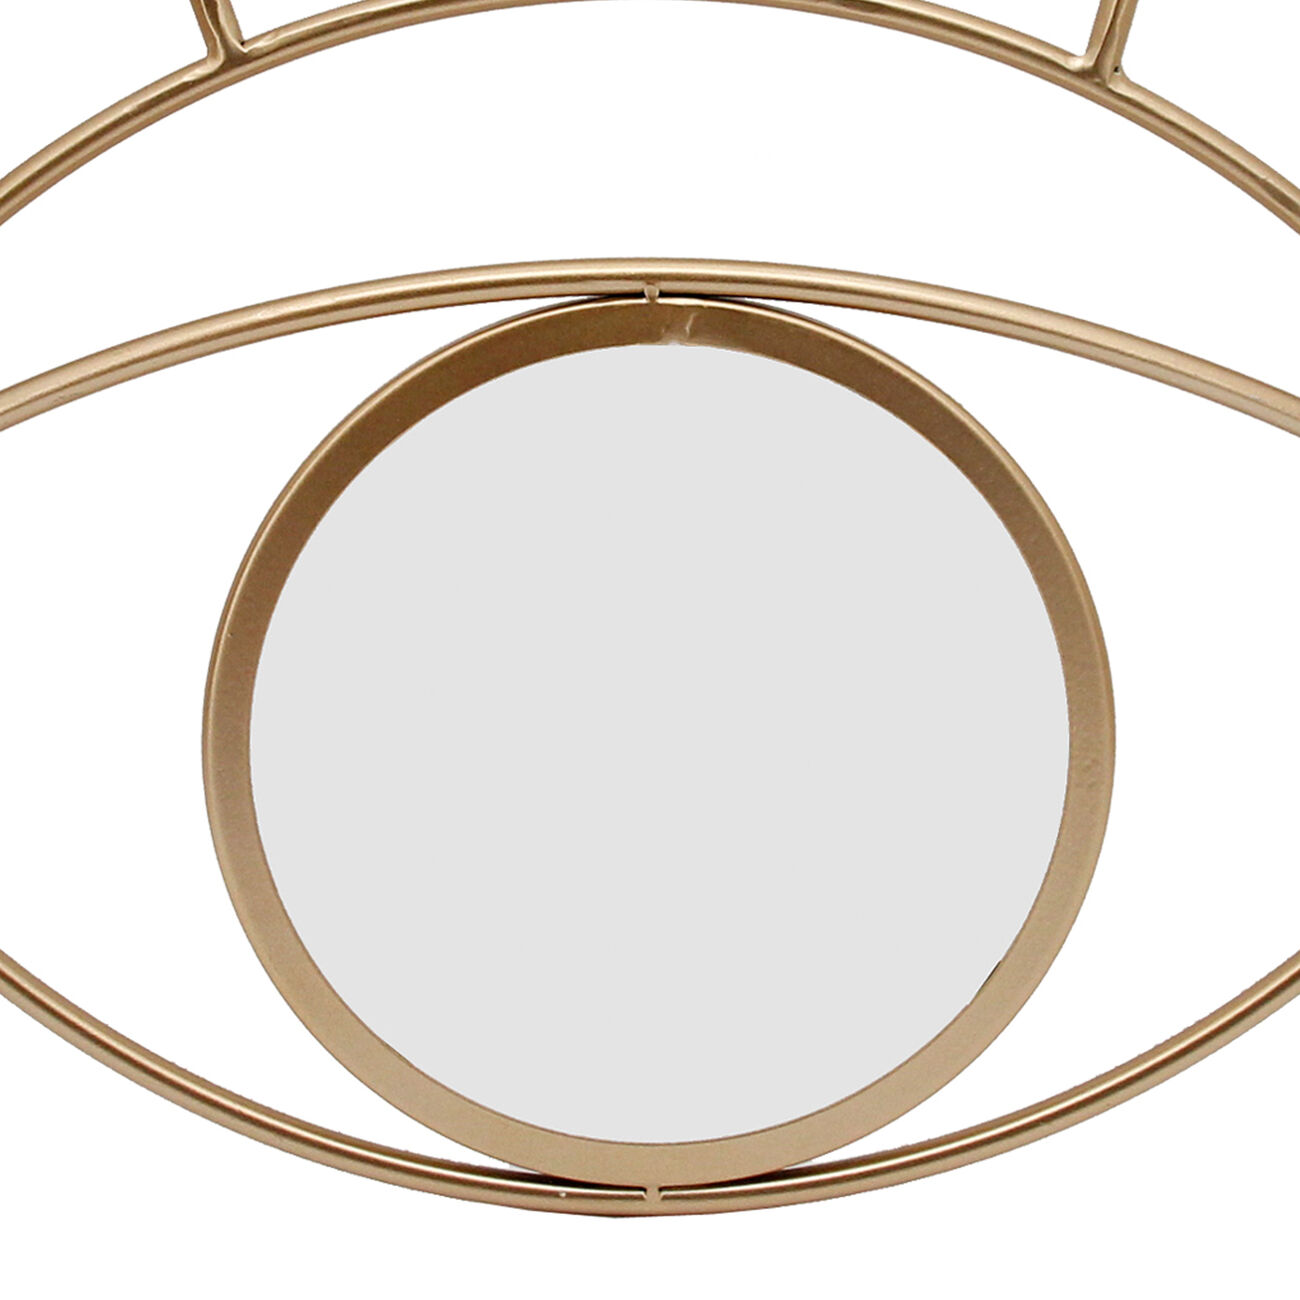 Contemporary Eye Design Metal Wall Decor with Round Mirror,Gold and Silver